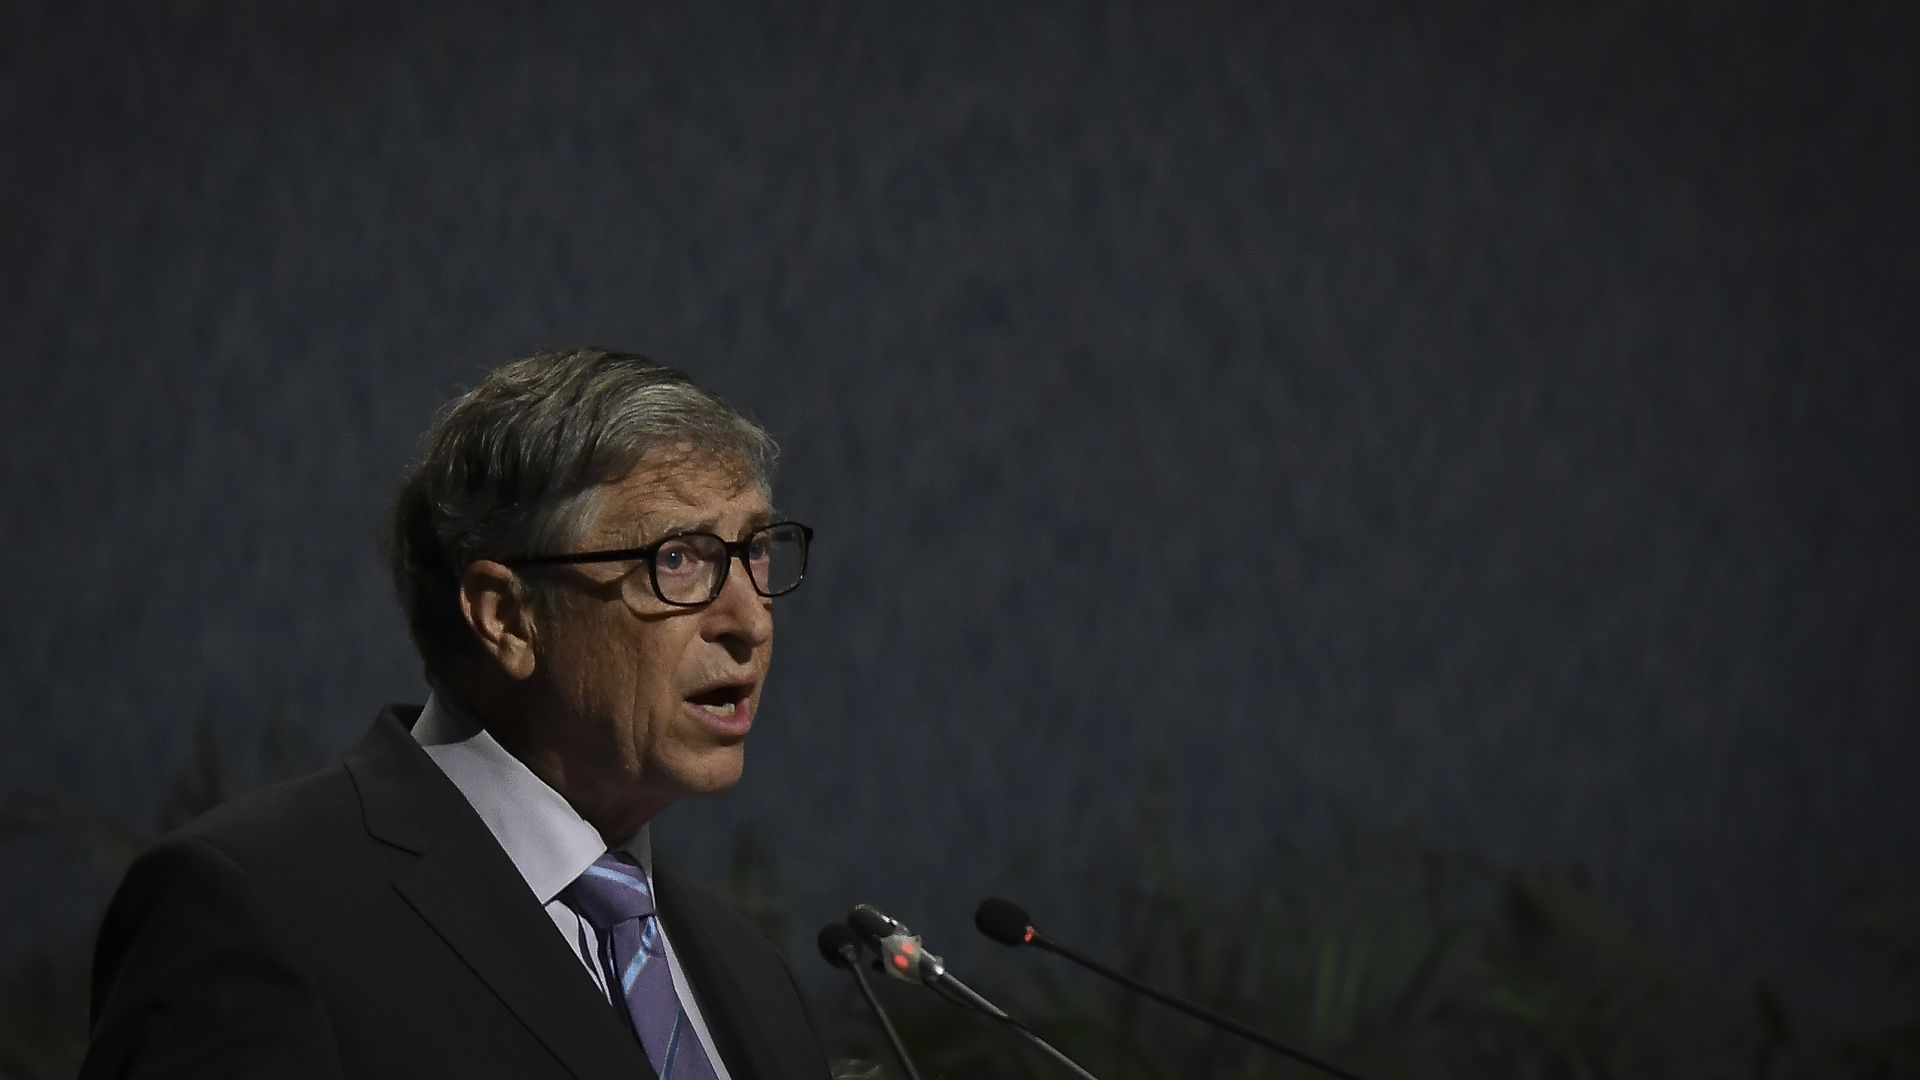 Bill Gates speaking at the 8th International Conference on Agriculture Statistics in India in 2019.